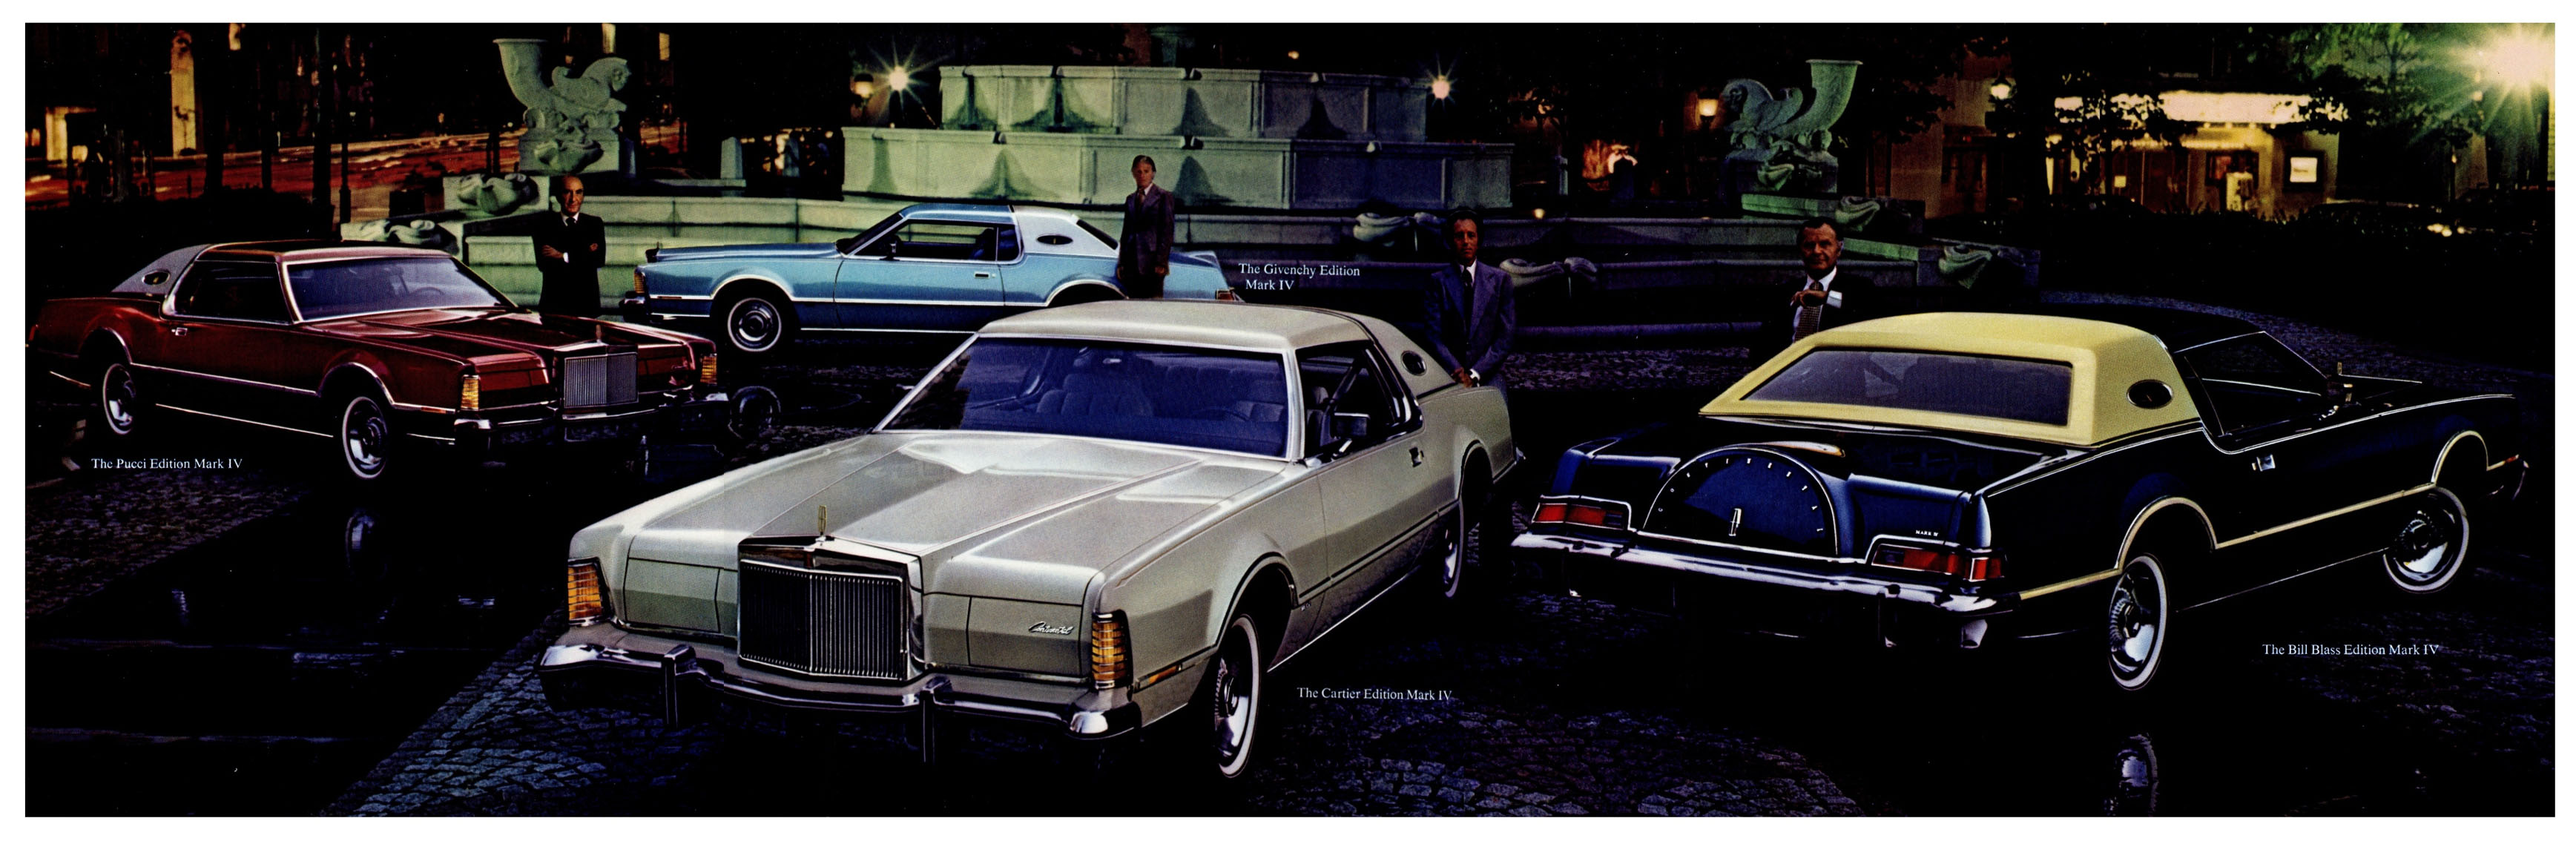 1976 Lincoln Continental Mark IV Brochure Page 2